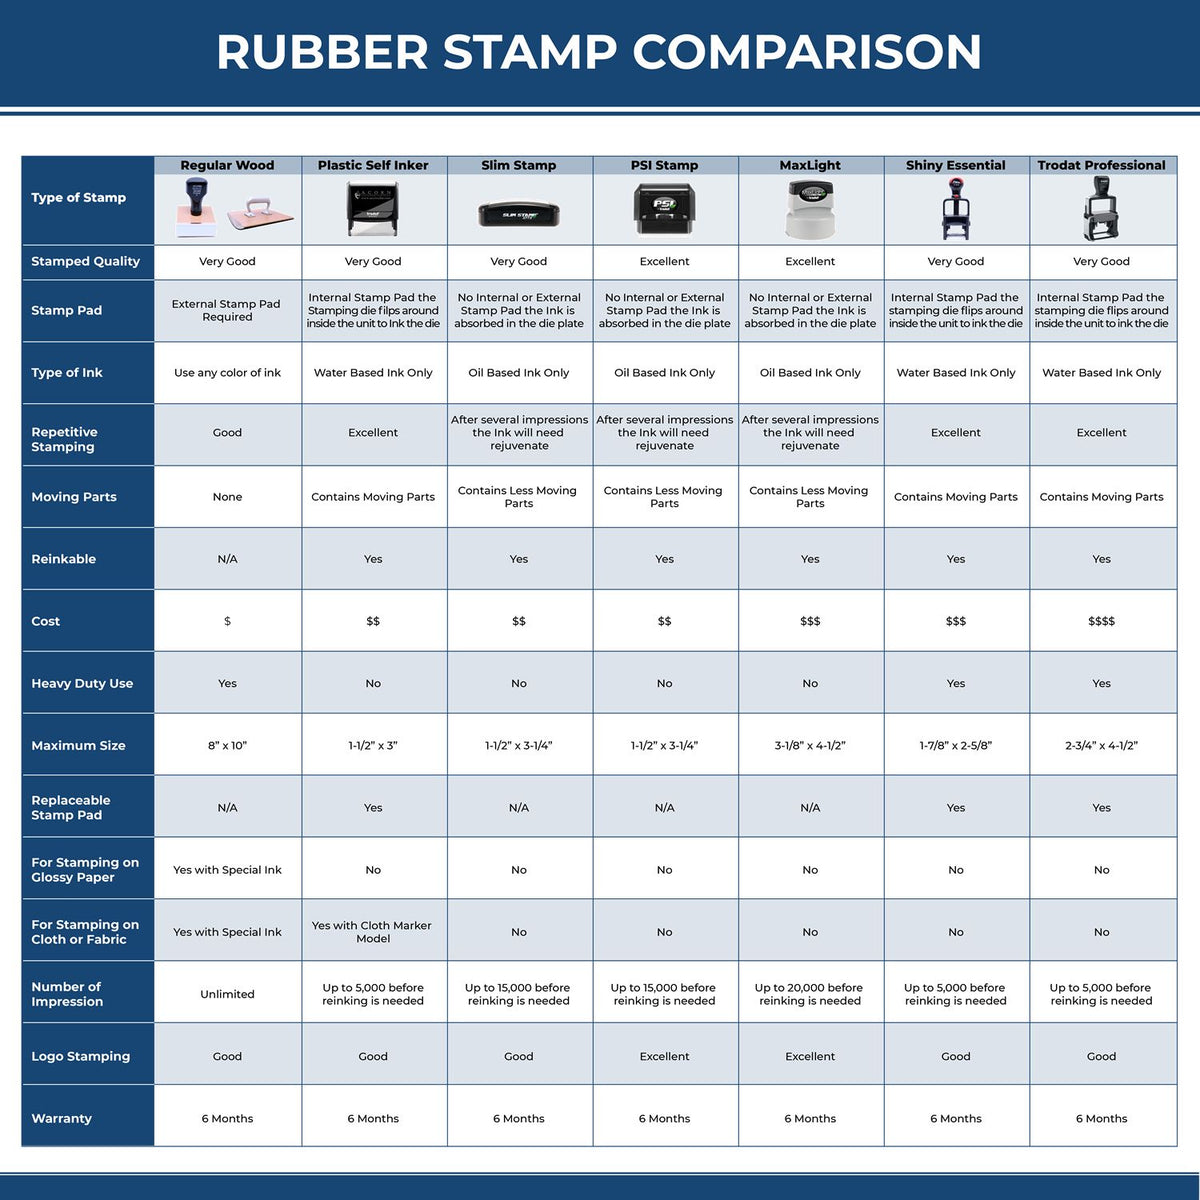 Advanced Placement Rubber Stamp 4334R Rubber Stamp Comparison